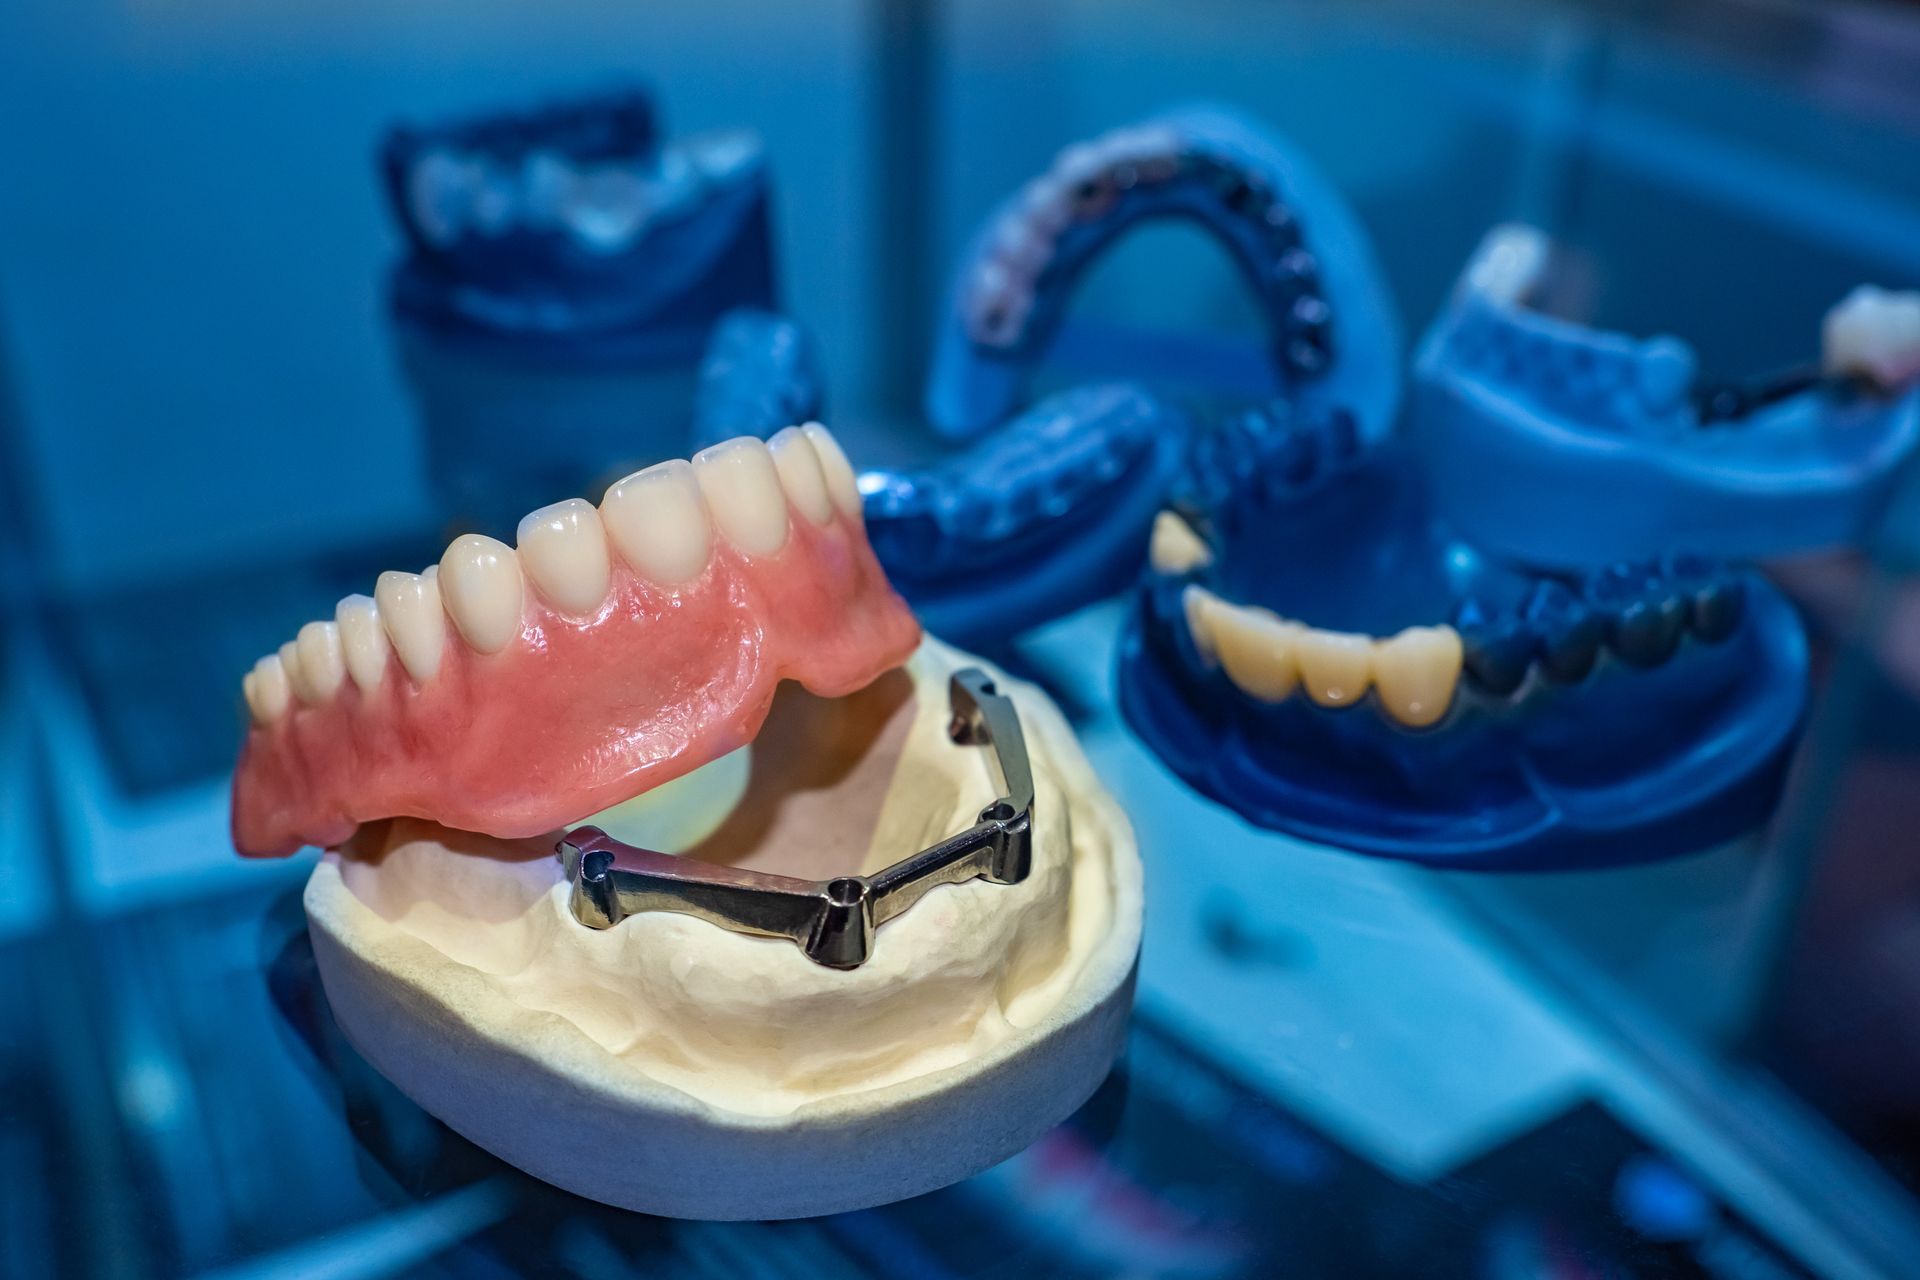 There are many different types of dentures on the table.